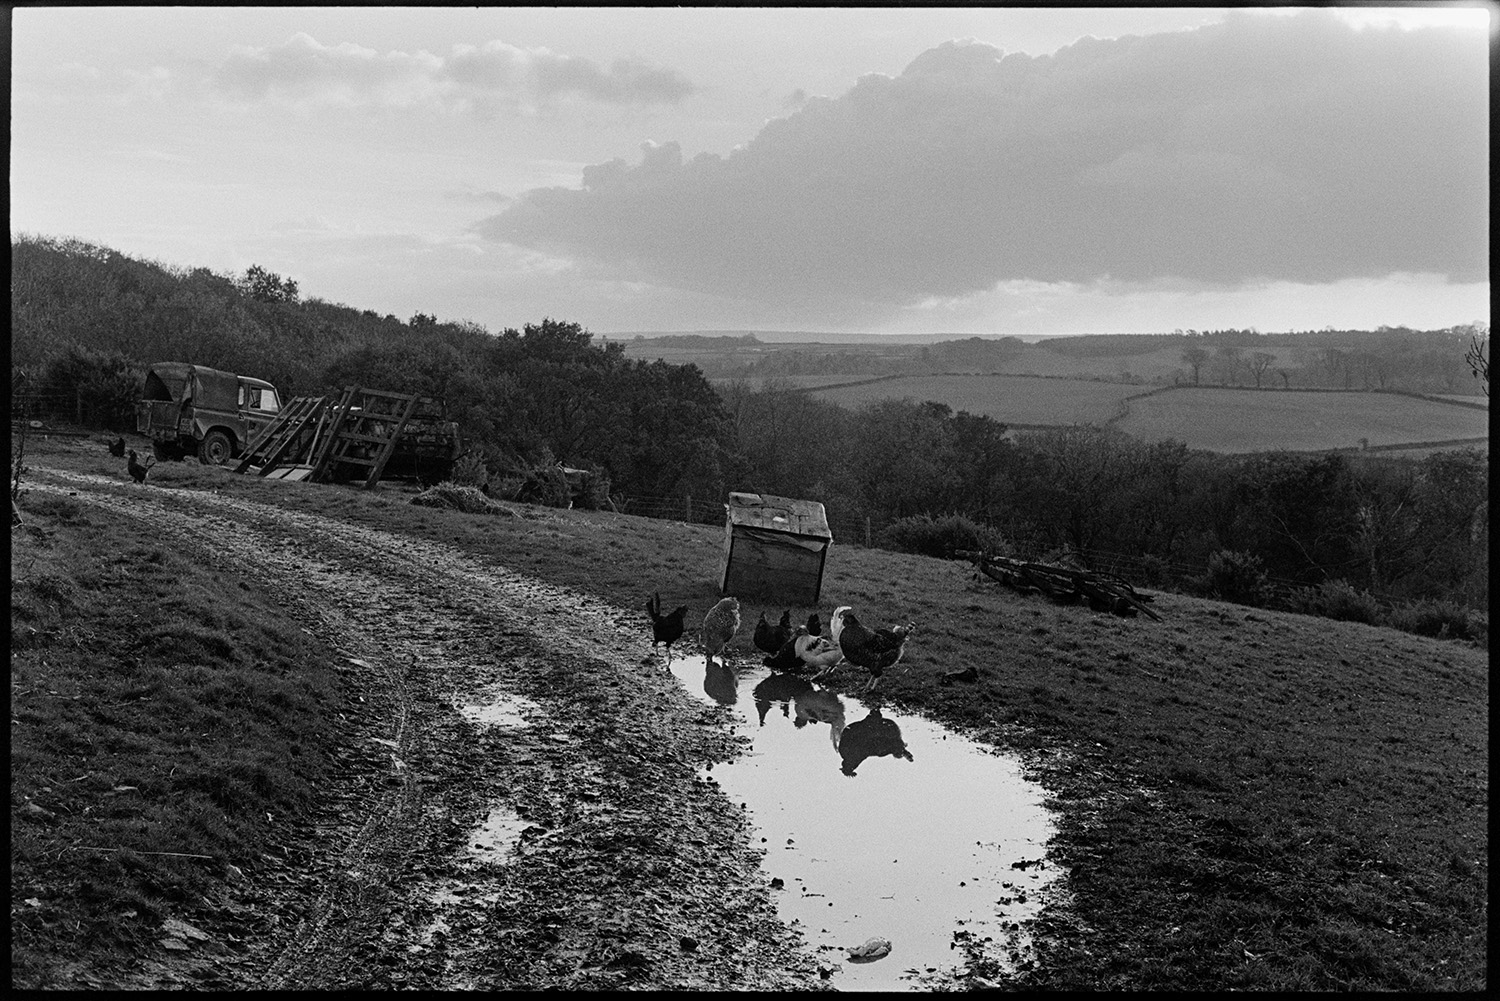 Hunters, horses and followers waiting for a scent, listening for hounds. 
[A group of chickens by a muddy track and a puddle in a field at Halsdon, Dolton. A Land Rover and wooden pallets are visible in the background.]